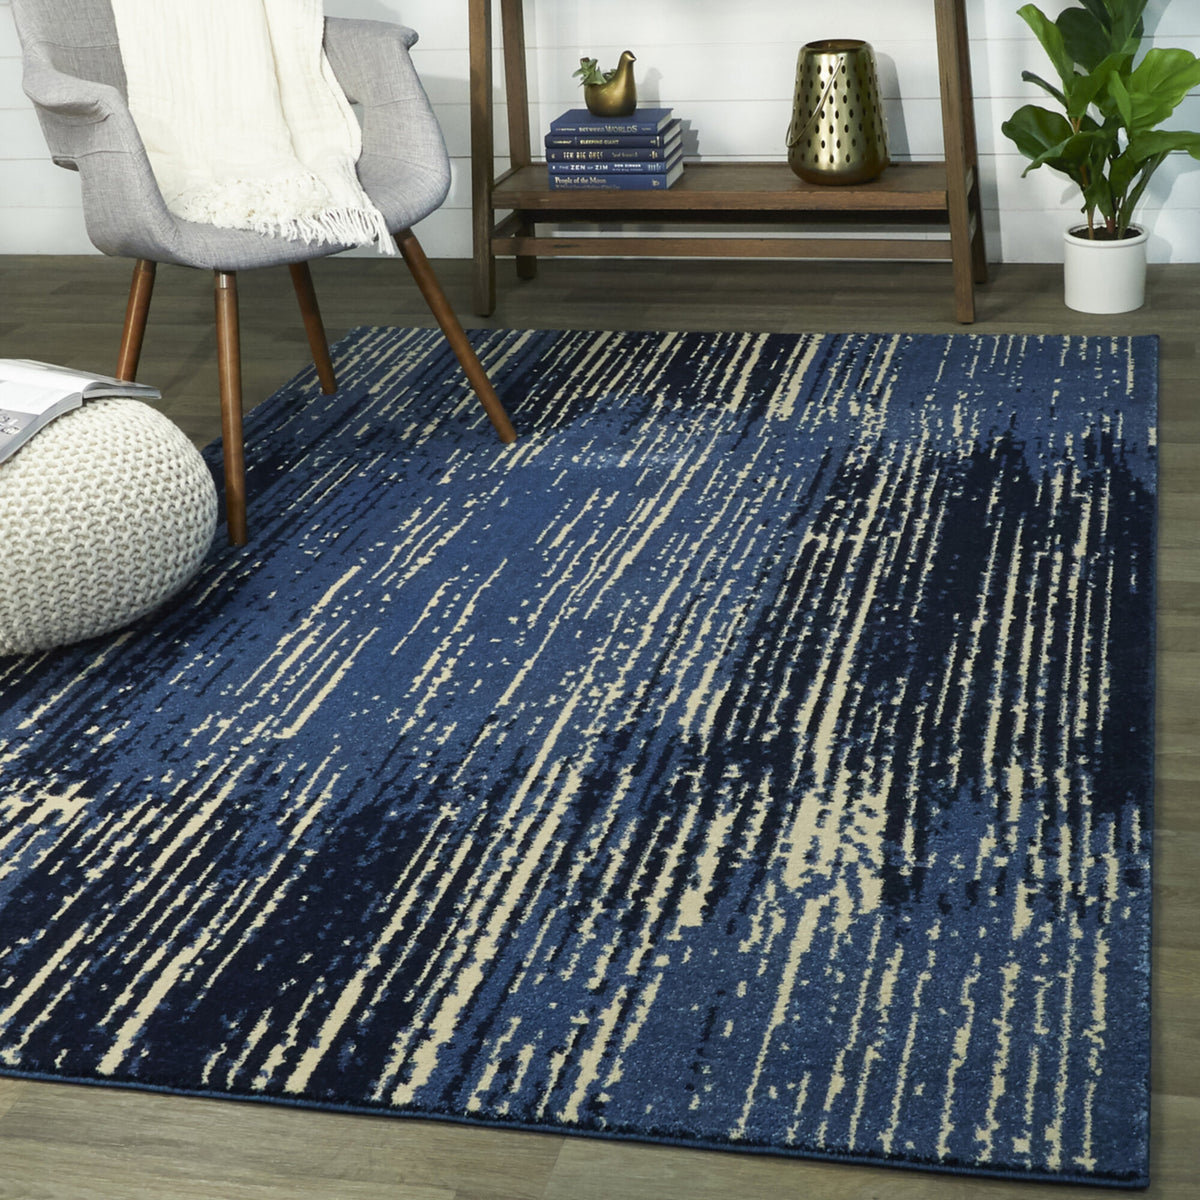 Chavot Abstract Contemporary Area Rug